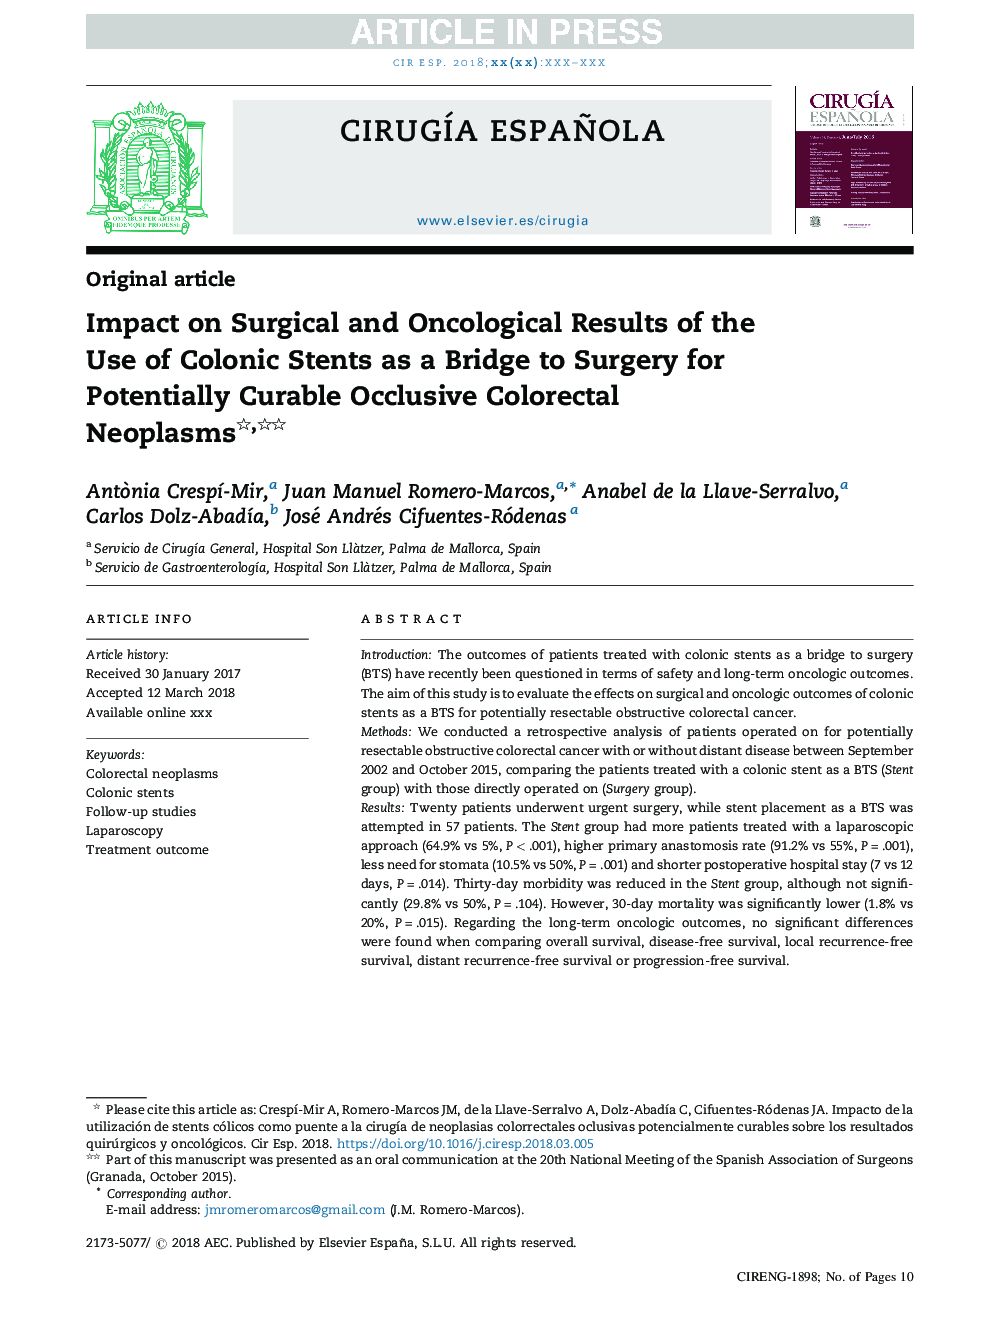 Impact on Surgical and Oncological Results of the Use of Colonic Stents as a Bridge to Surgery for Potentially Curable Occlusive Colorectal Neoplasms